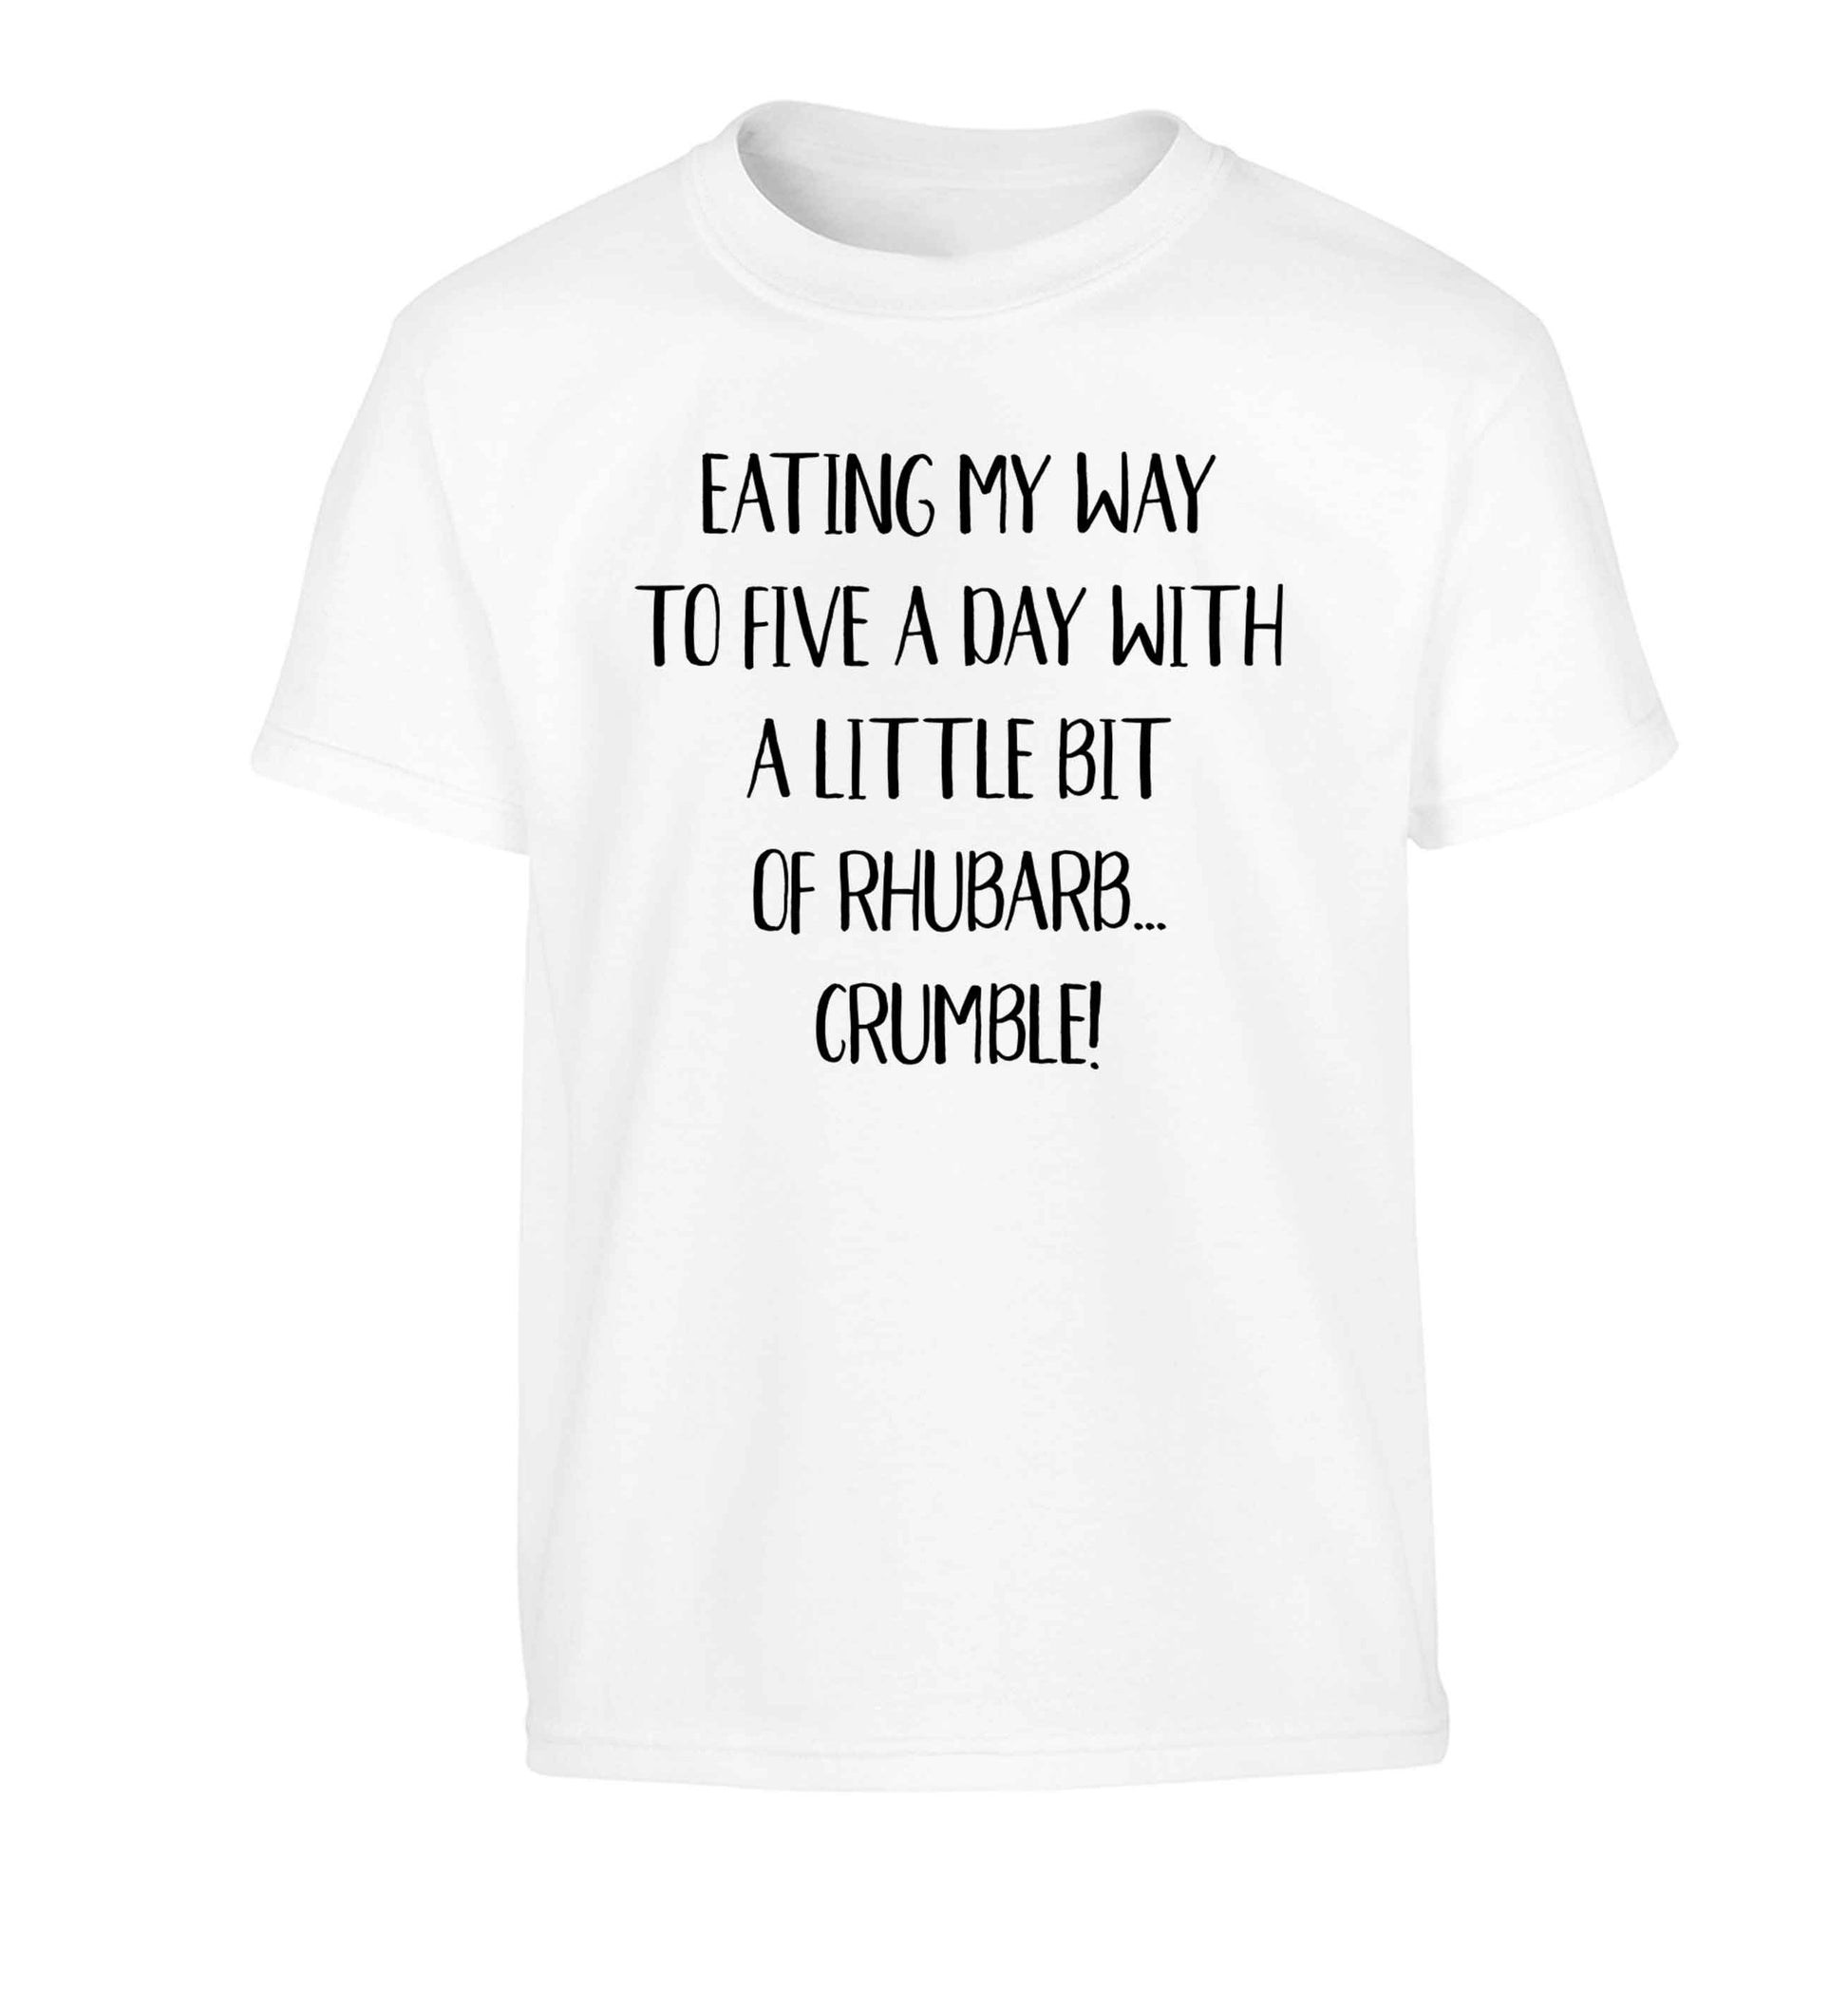 Eating my way to five a day with a little bit of rhubarb crumble Children's white Tshirt 12-13 Years